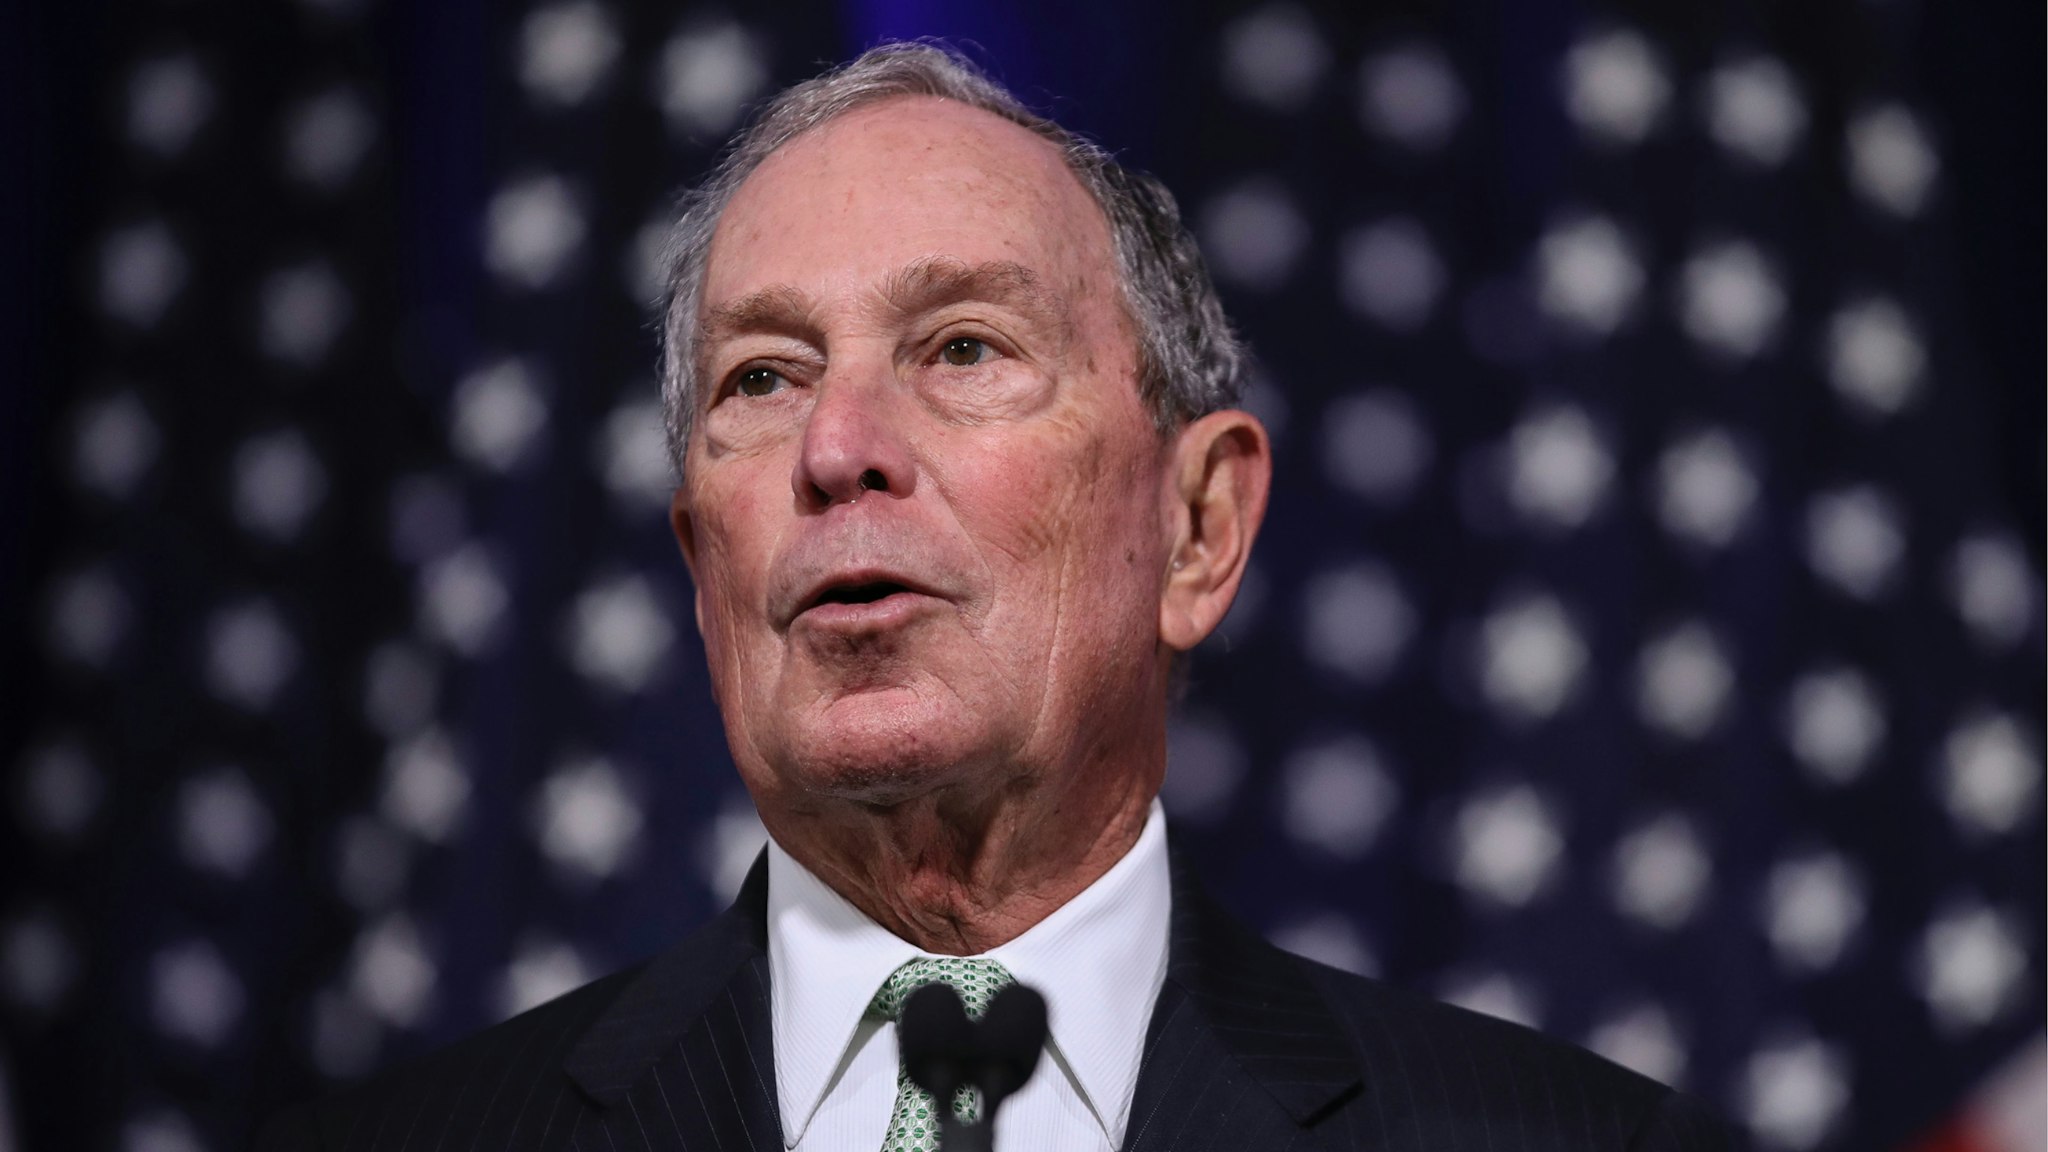 Newly announced Democratic presidential candidate, former New York Mayor Michael Bloomberg speaks during a press conference to discuss his presidential run on November 25, 2019 in Norfolk, Virginia.